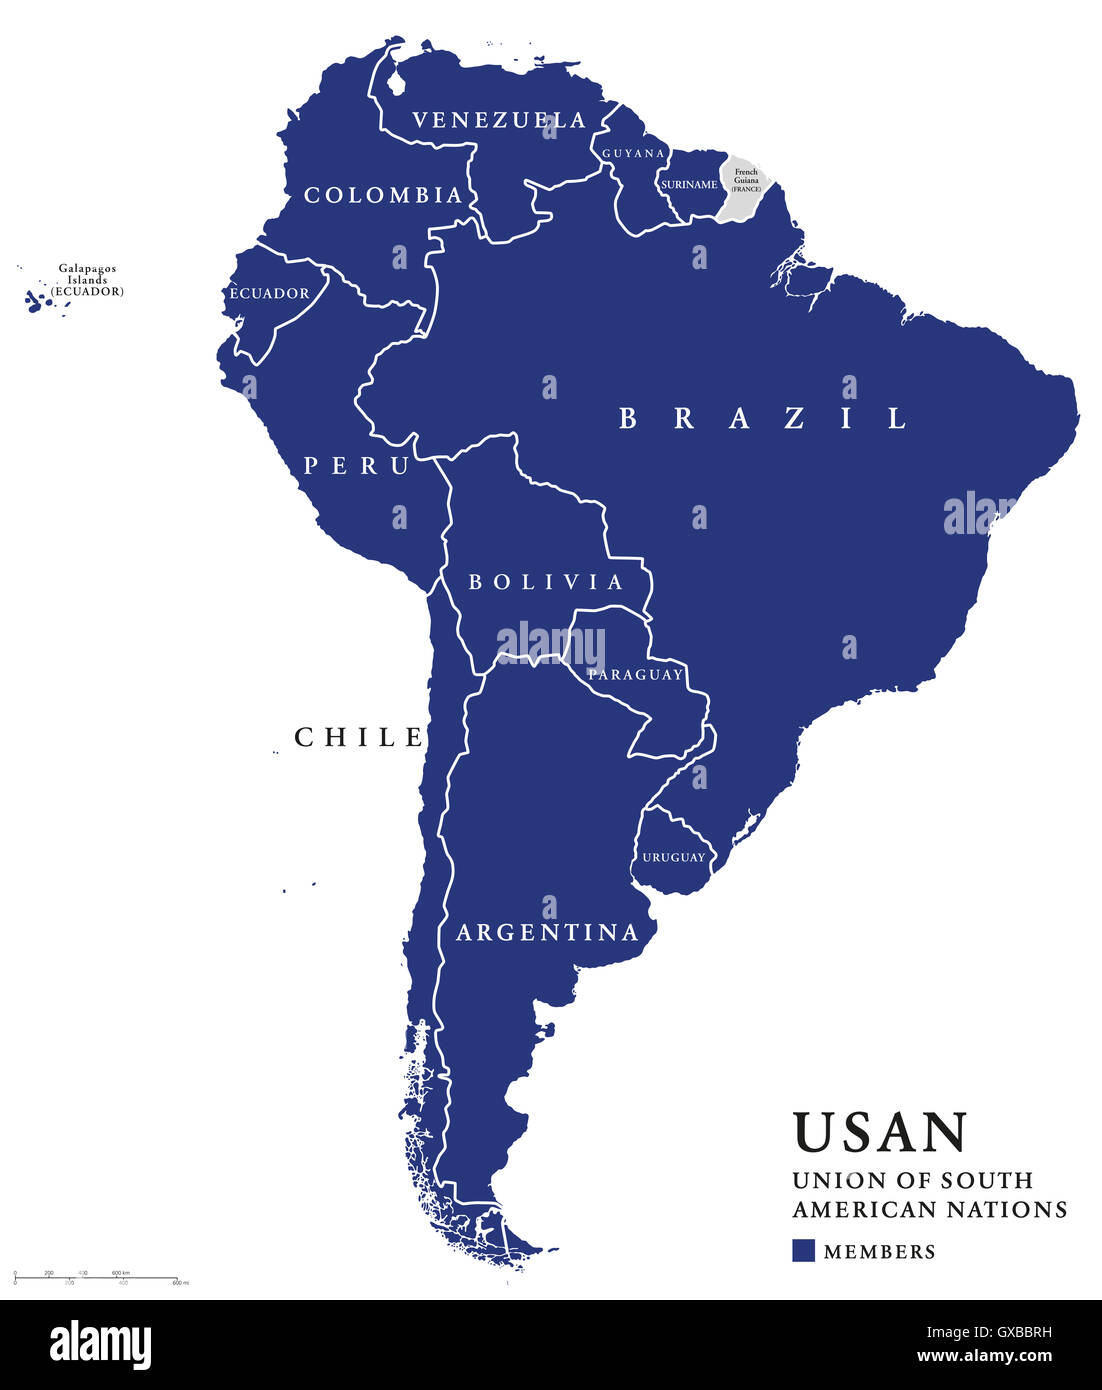 USAN, Union of South American Nations map, an intergovernmental regional organization comprising twelve South American countries Stock Photo